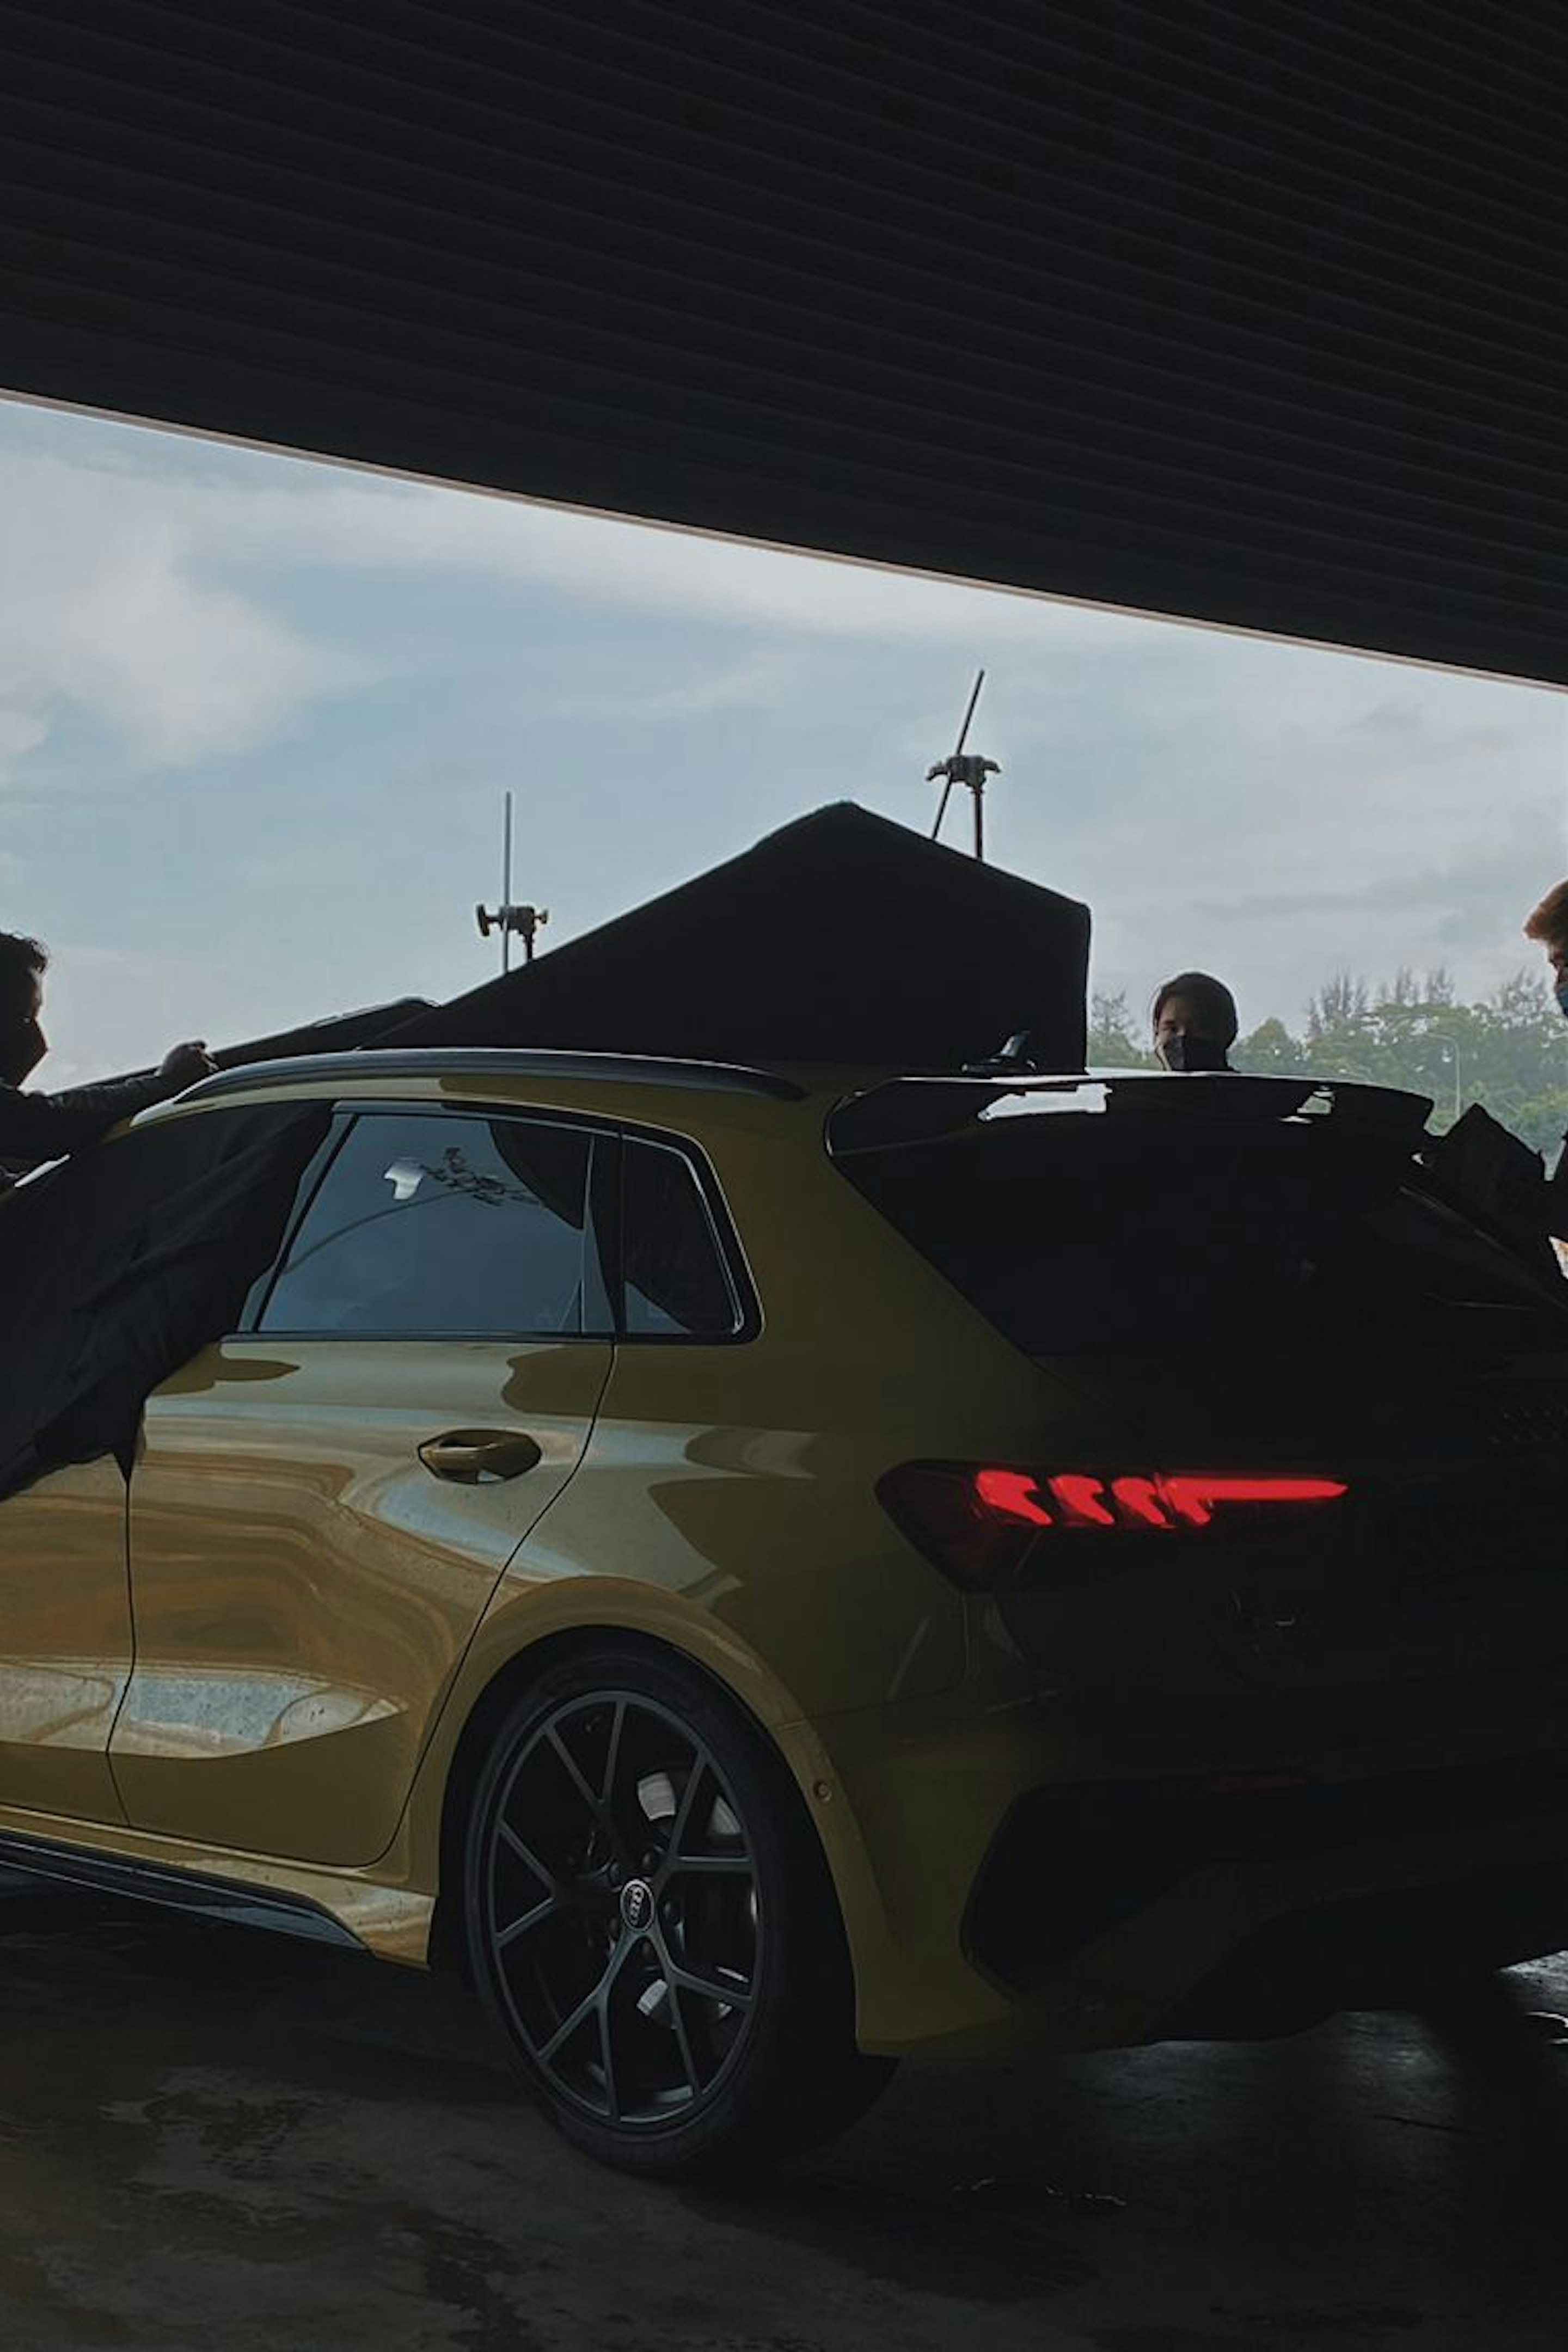 BTS | electriclime° partner with BBDO Singapore to bring the launch of the new Audi RS3 to life.